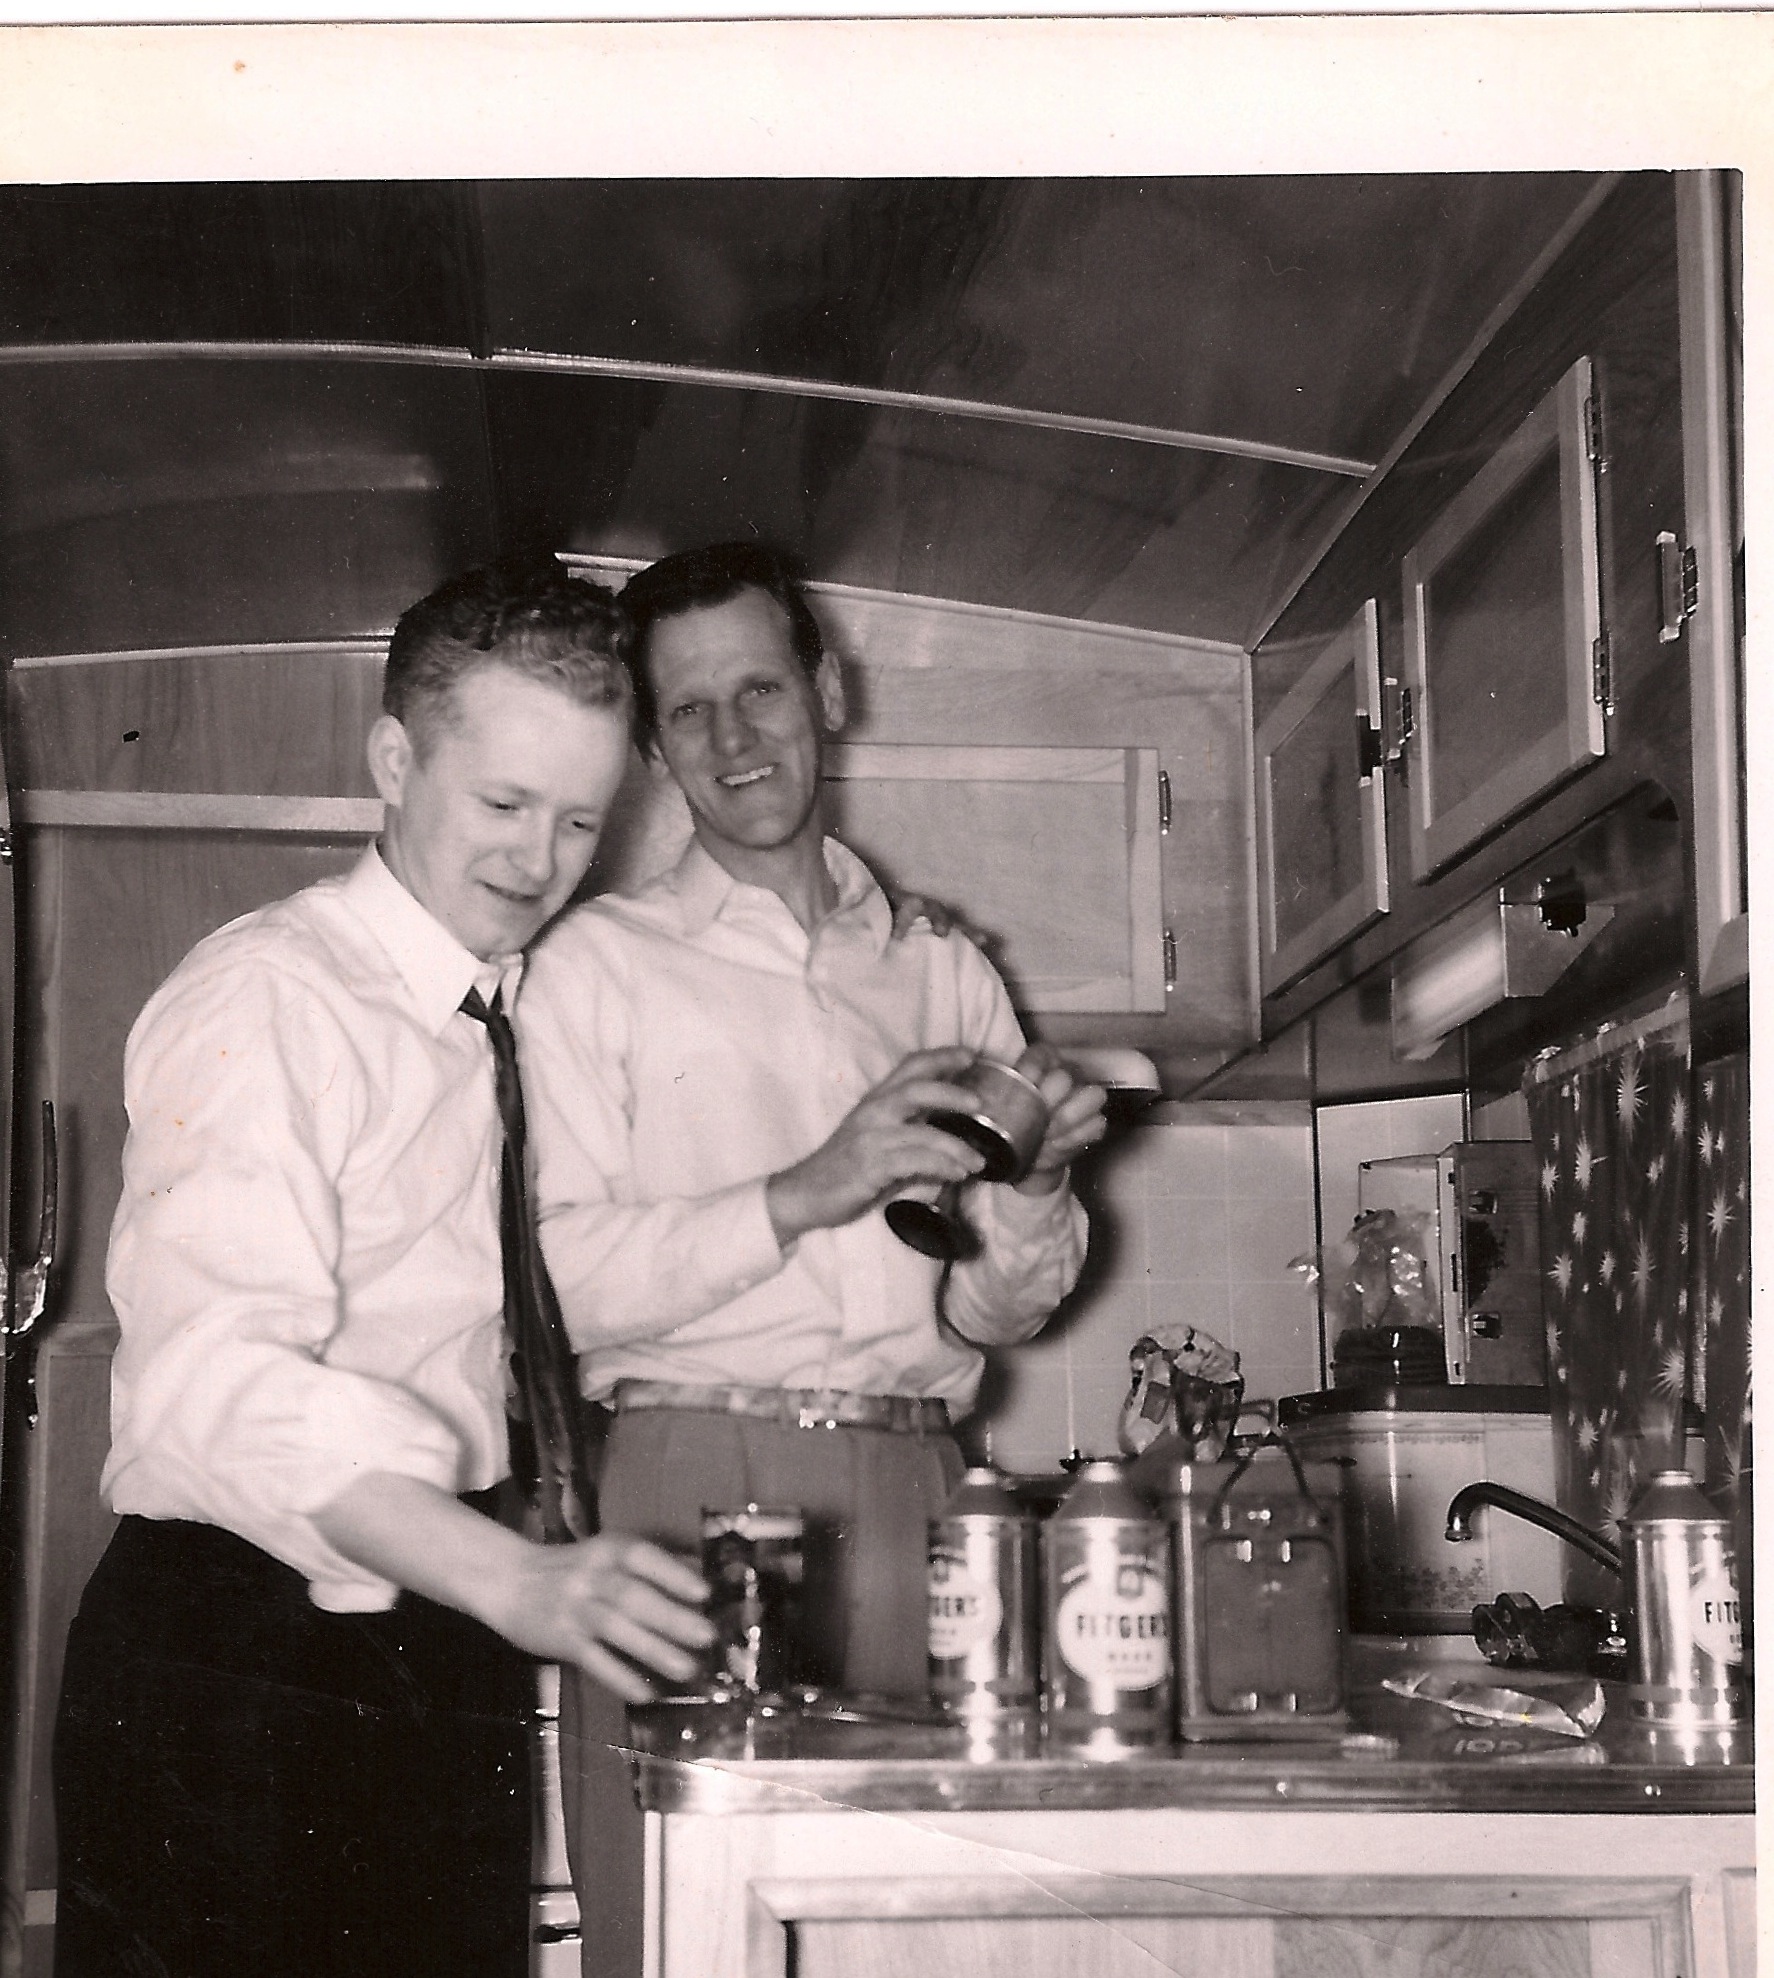 Two fellows enjoying Fitgers Beer from conetop style cans. They look to be in a trailer, camper or something similar. Why the one fellow is wearing a tie is a mystery, but he sure seems happy to down a beer. Fitgers was a large regional brewery in Duluth, MN. They lasted until 1972. The conetop cans in the picture were from around 1960 I'd guess. View full size.